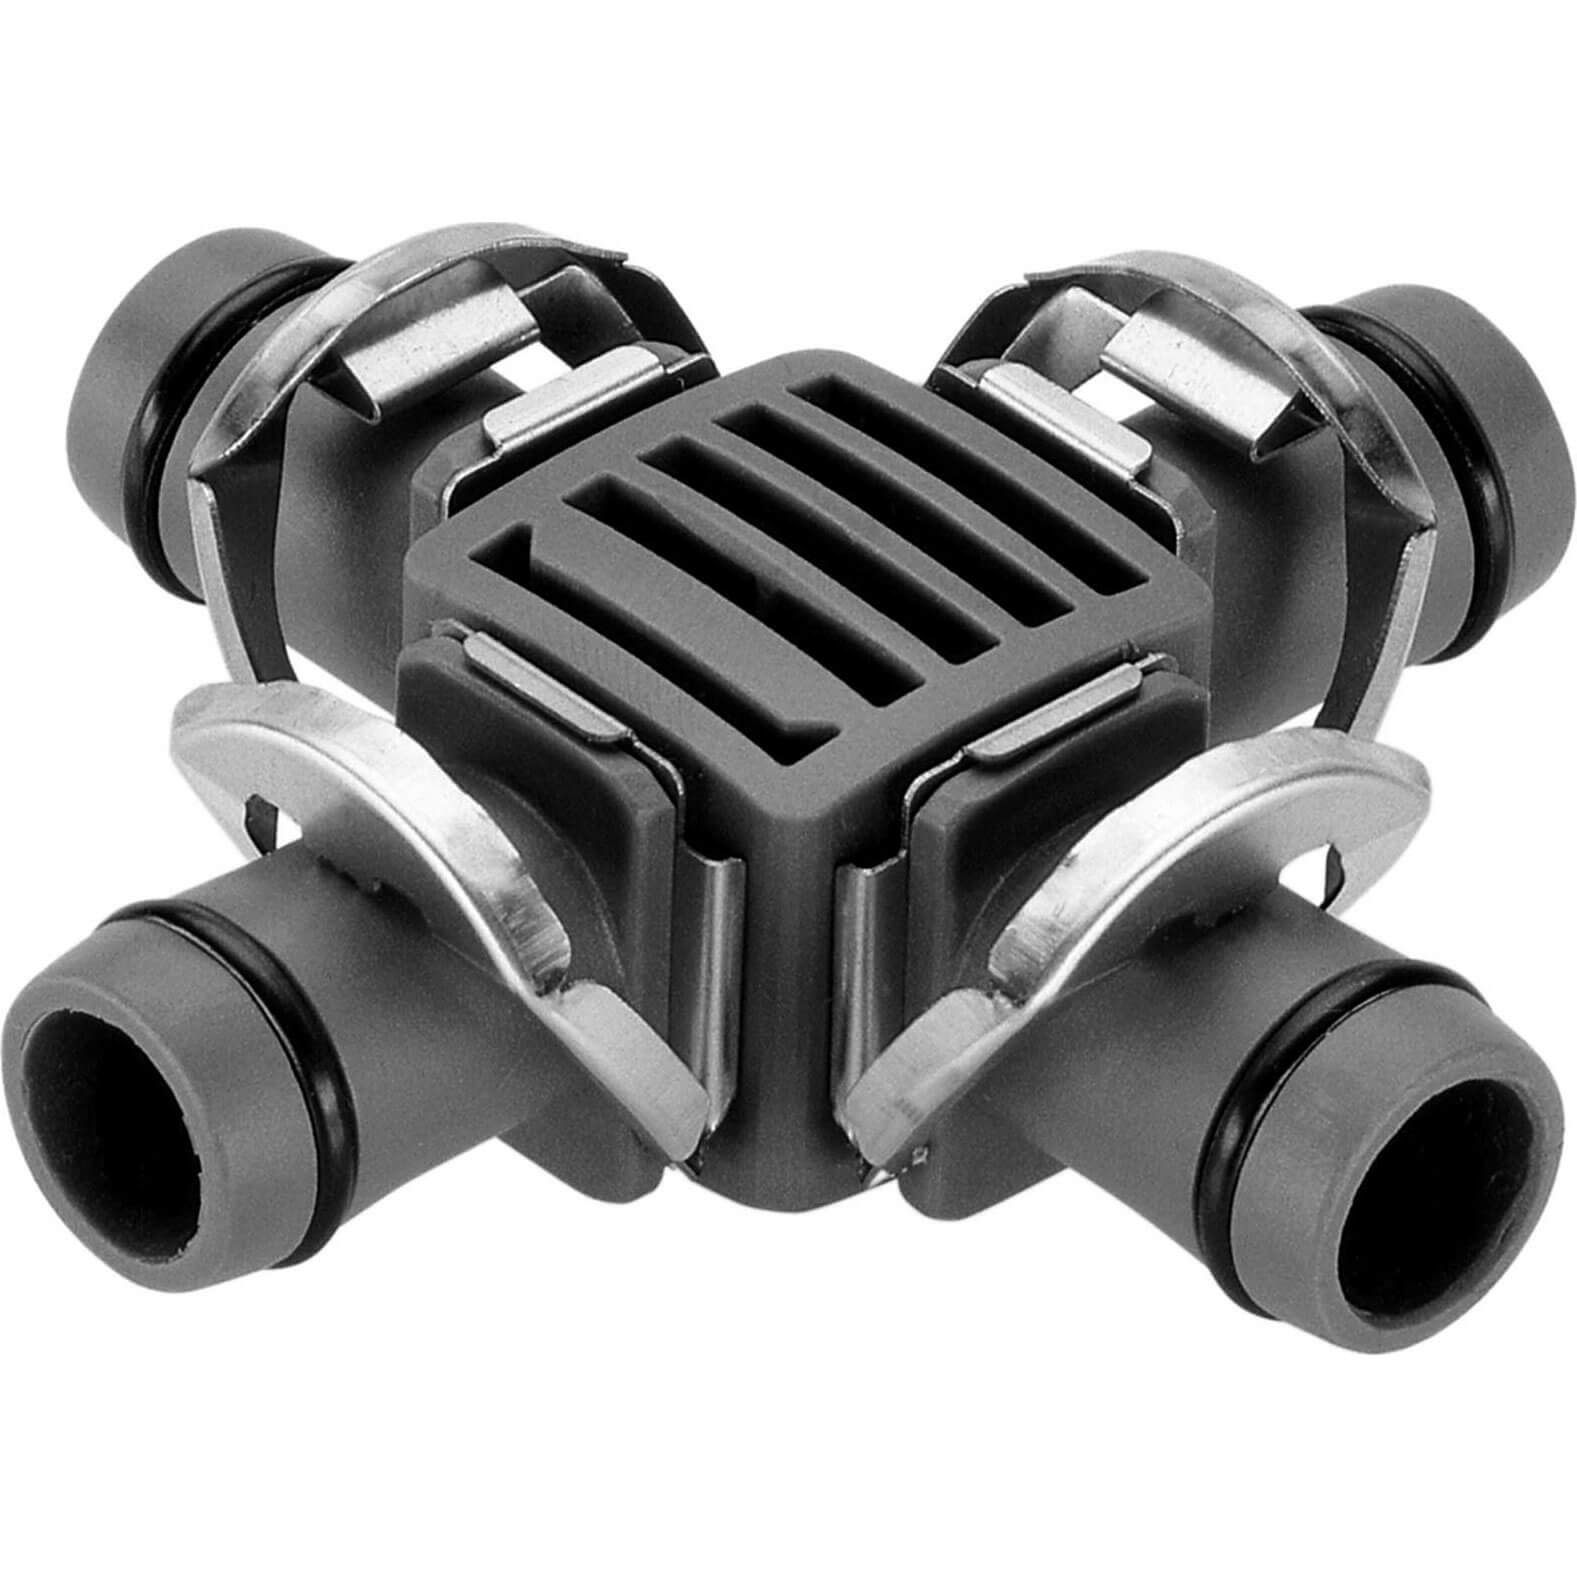 Photos - Other for Irrigation GARDENA MICRO DRIP 4 Way Coupling 1/2" / 12.5mm Pack of 1 8339-20 